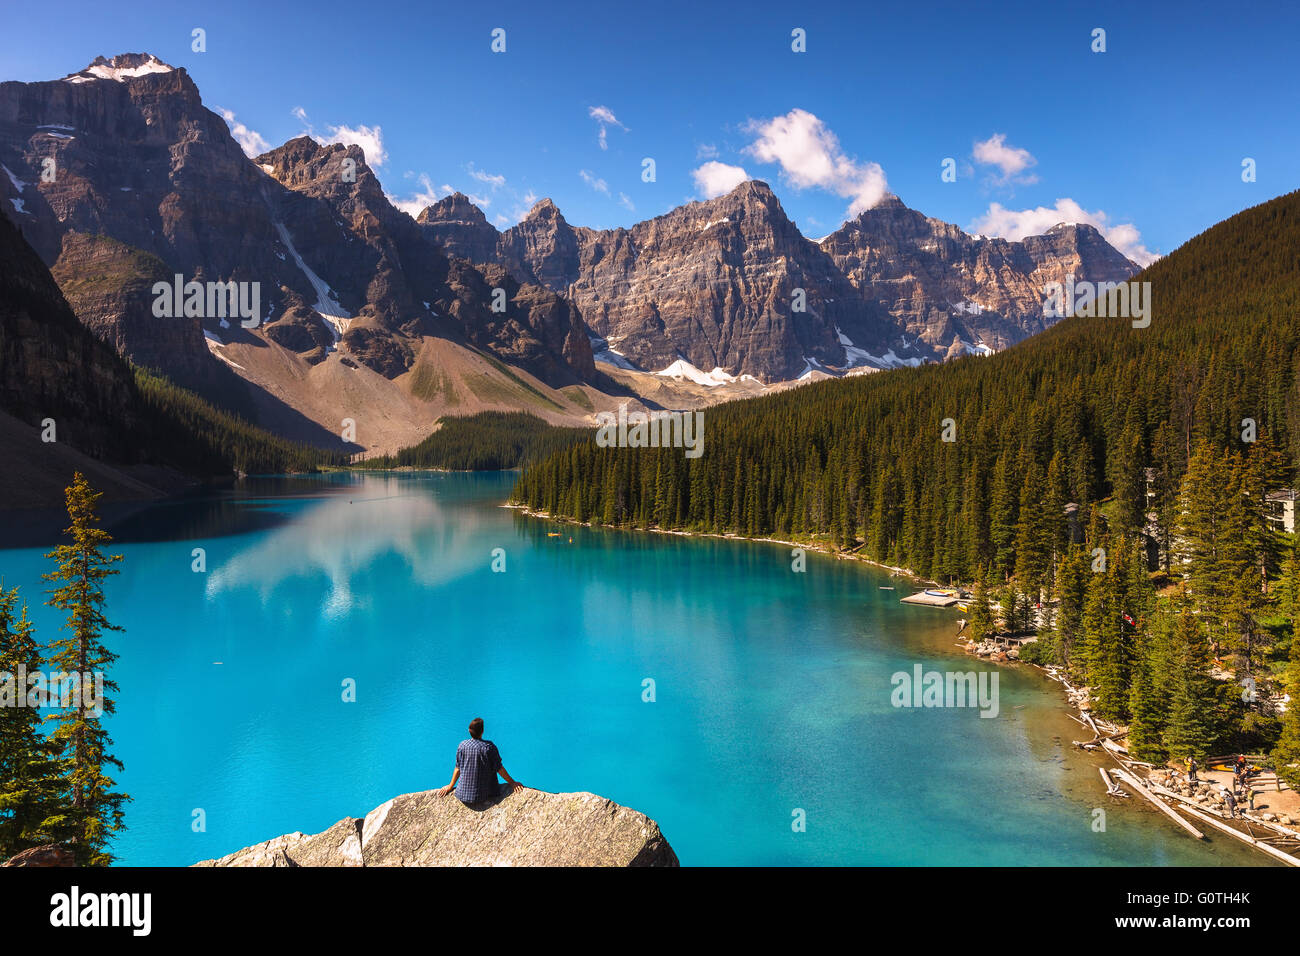 A man enjoying the view of Moraine Lake by sunrise, Banff National Park, Alberta, Canada, America (Canadian Rocky Mountains). Stock Photo